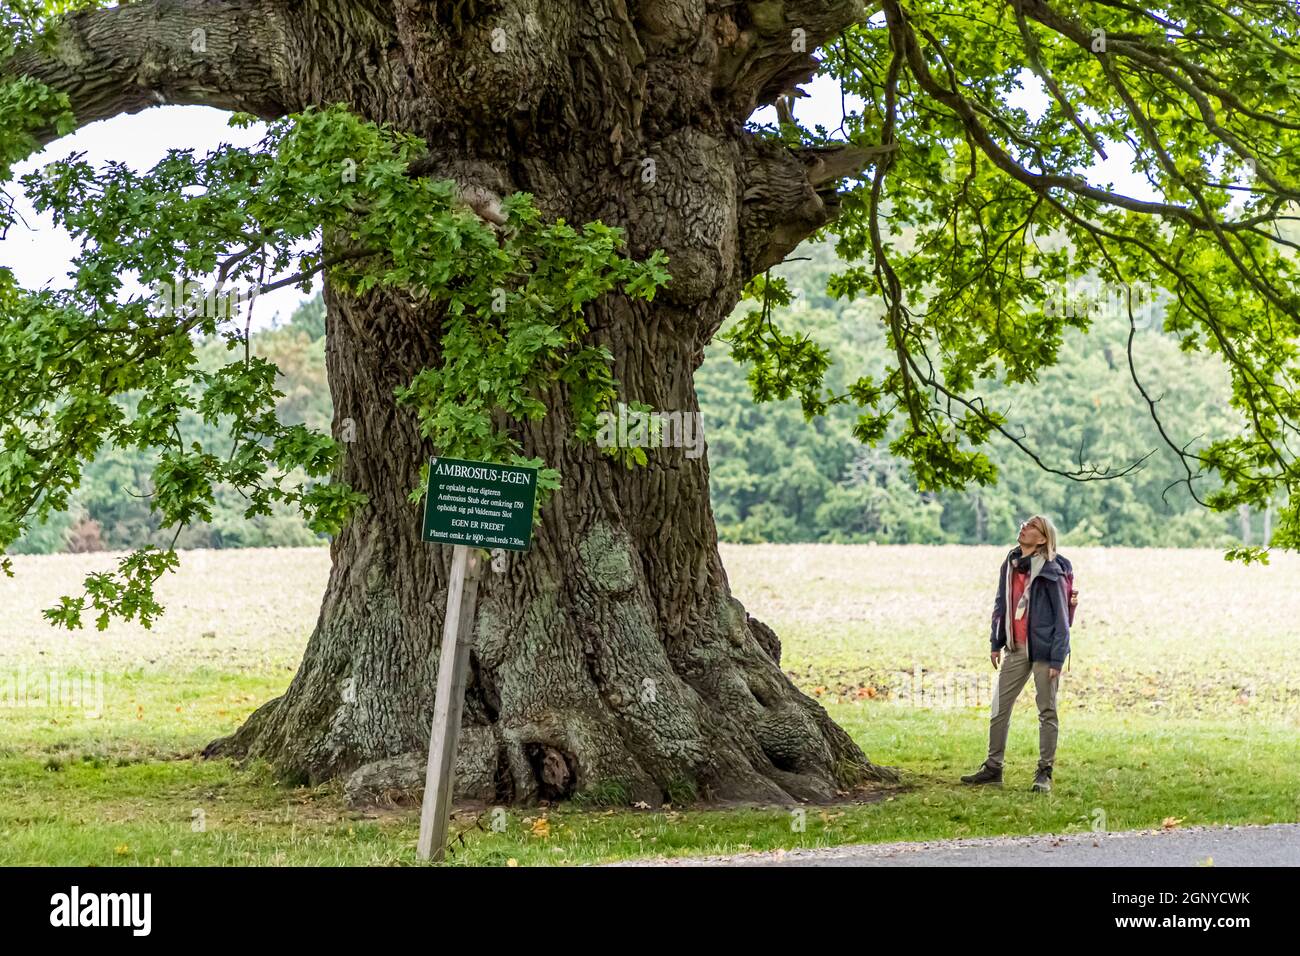 The Ambrosius oak is over 500 years old. It owes its name to the poet Ambrosius Stub, who gladly took a seat at her trunk and poetized. Troense, Svendborg, Denmark Stock Photo